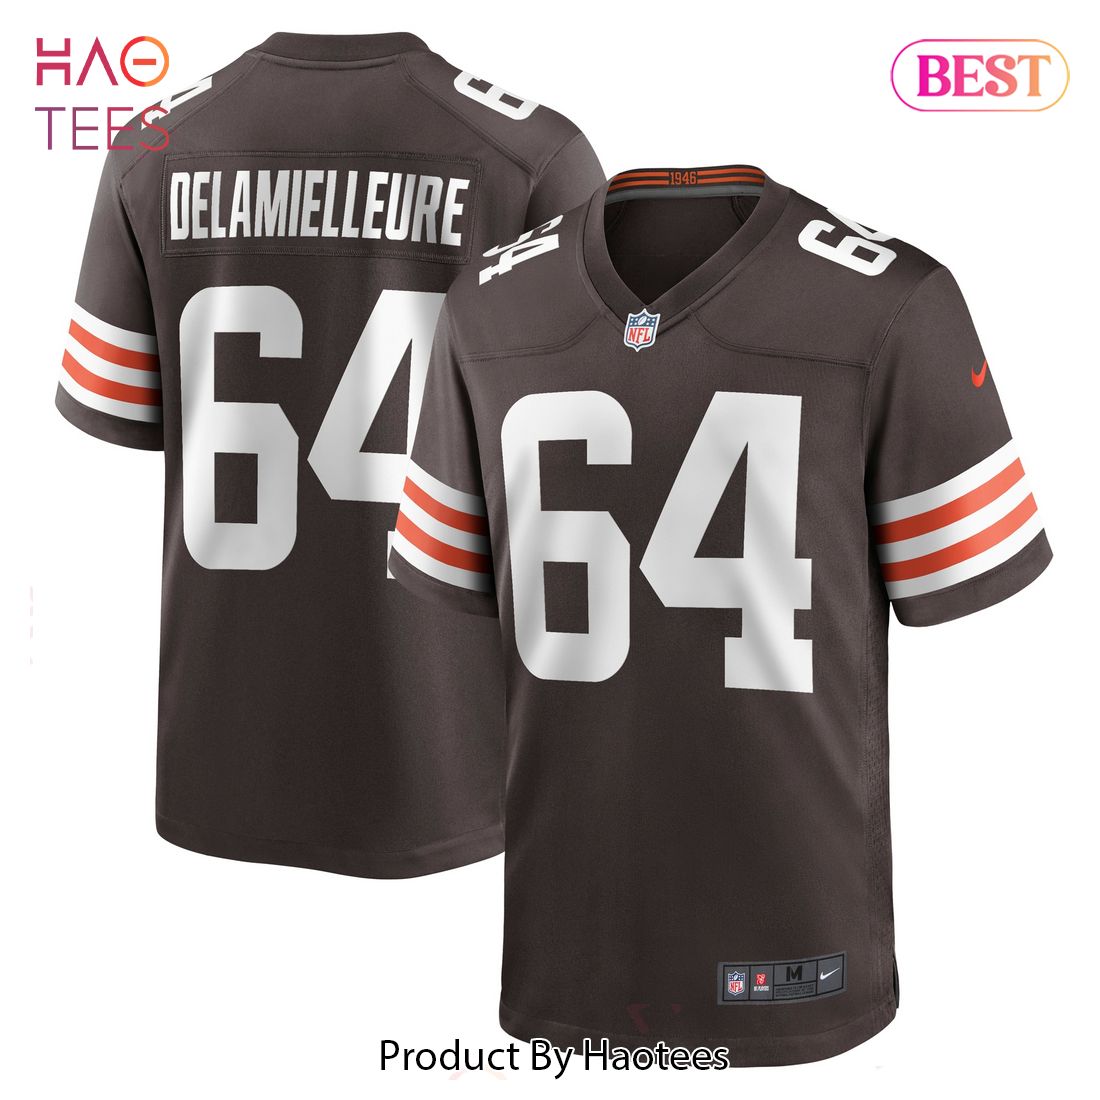 Joe DeLamielleure Cleveland Browns Nike Game Retired Player Jersey Brown